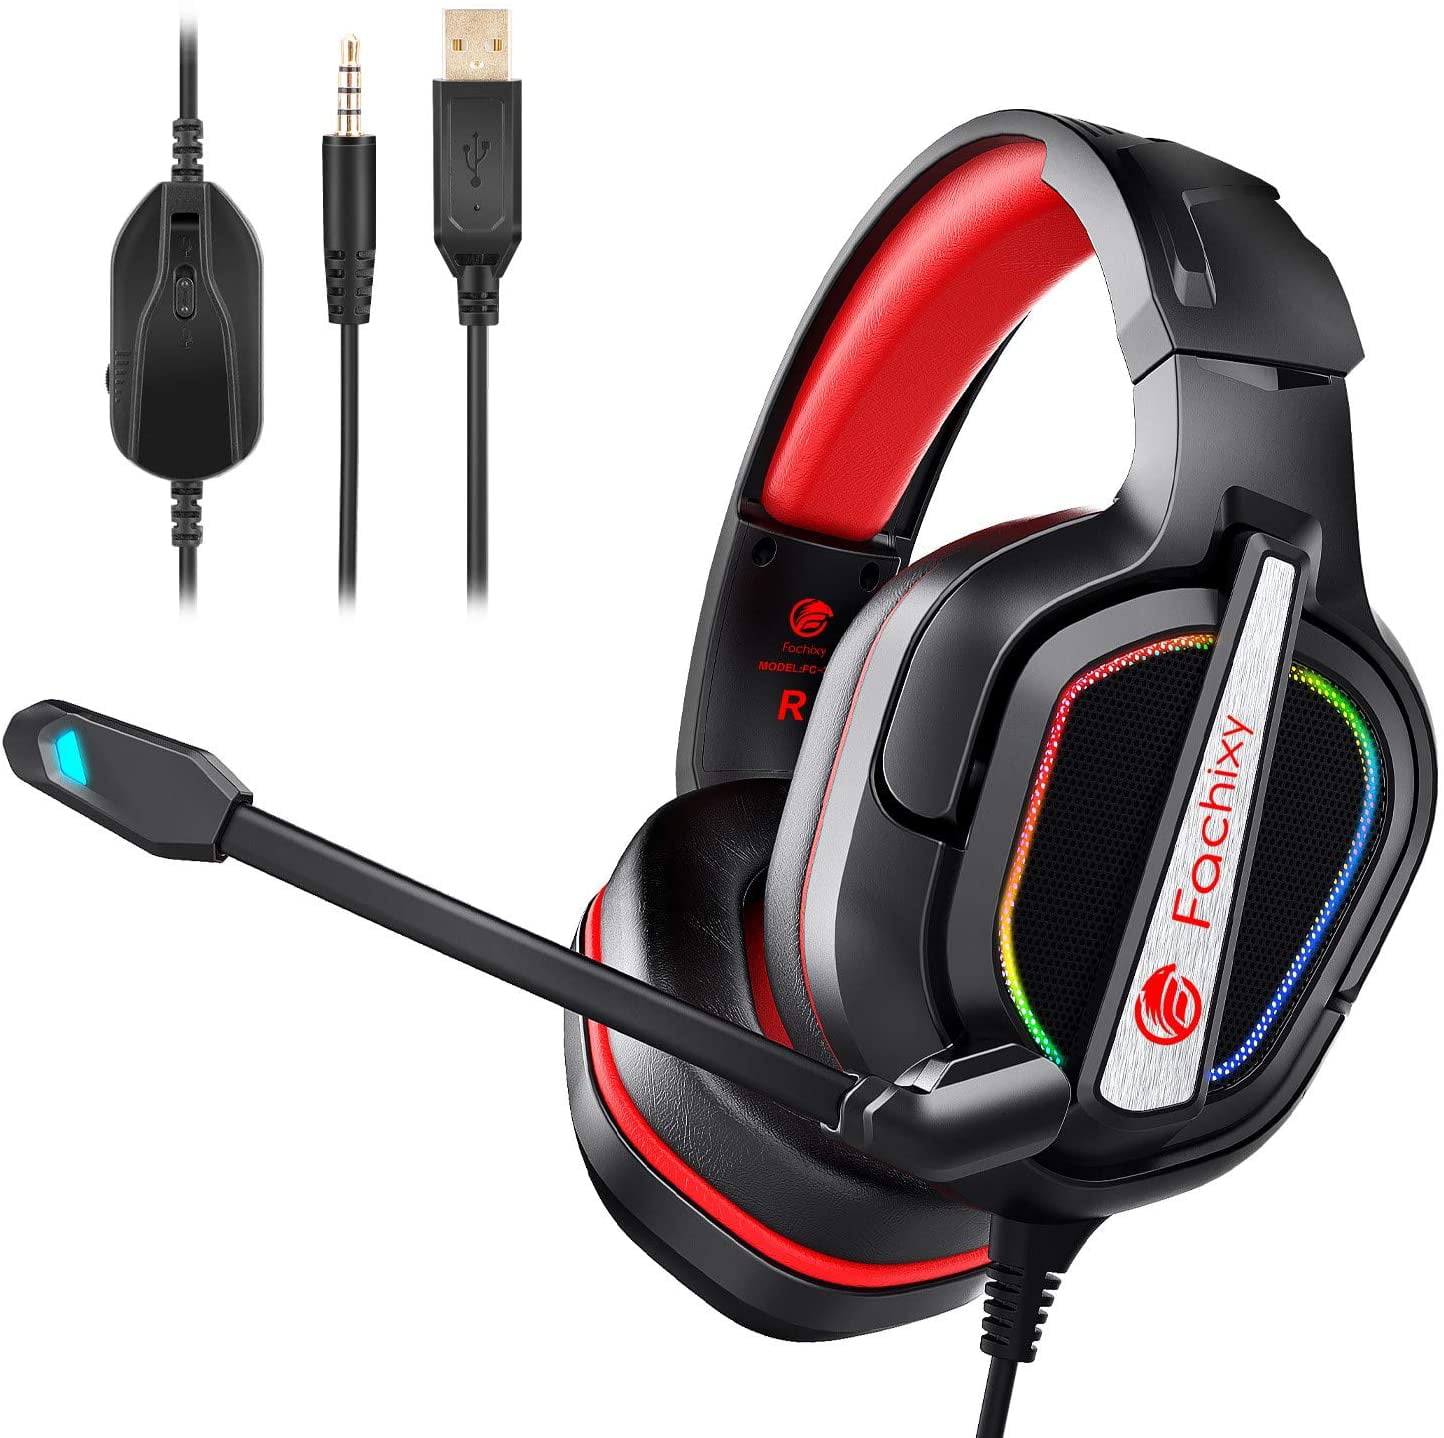 RGB Lights Soulion Tracer 30 PC Gaming Headset Virtual 7.1 Stereo Surround Sound Headphones with Noise Cancelling Microphone USB Plug for Laptops Computers 